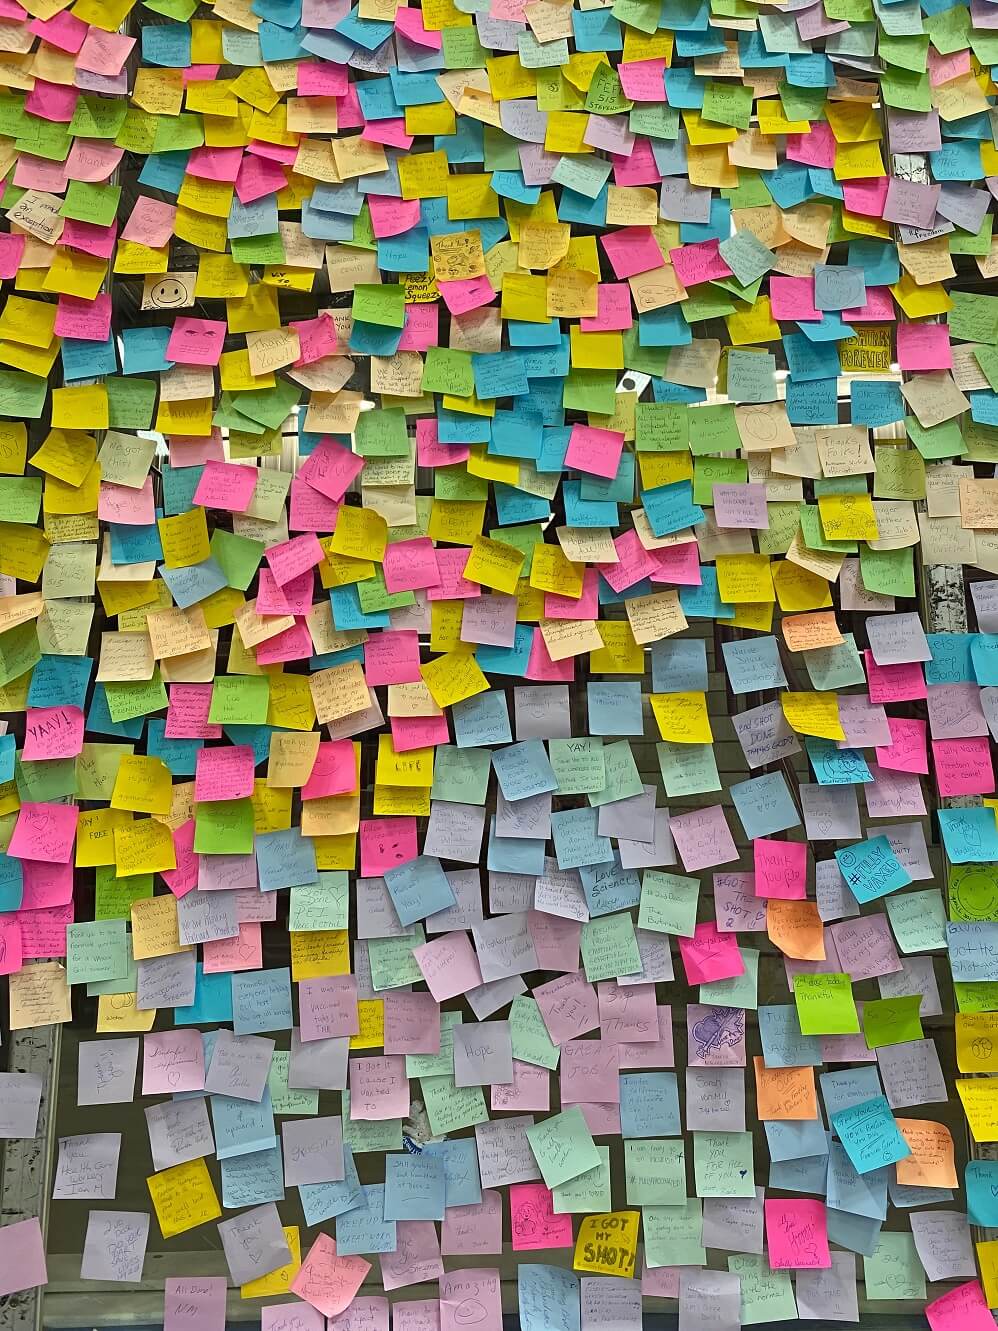 How to Deepen Your Relationship with God start with worship that sticks like hundreds of sticky notes on a wall